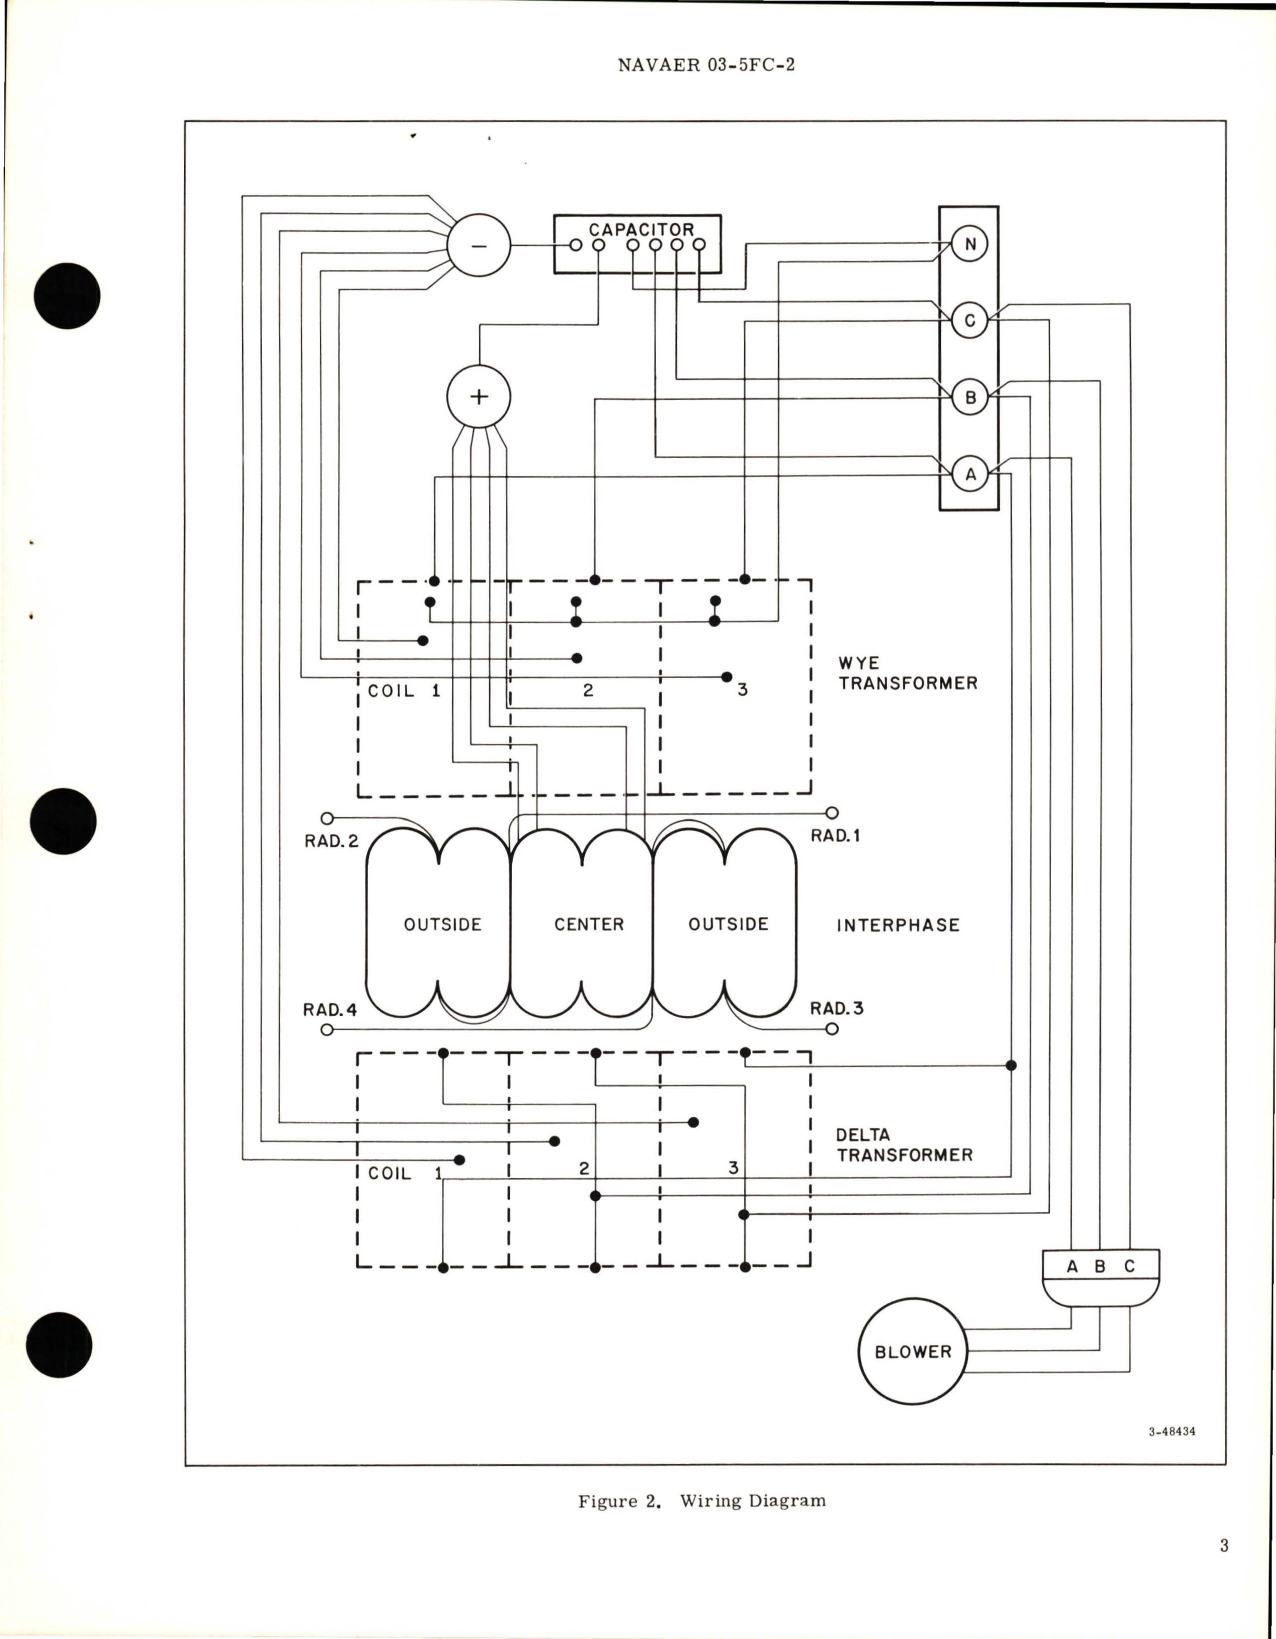 Sample page 5 from AirCorps Library document: Overhaul Instructions with Parts Breakdown for 200 Amp Converter - Part DW1033